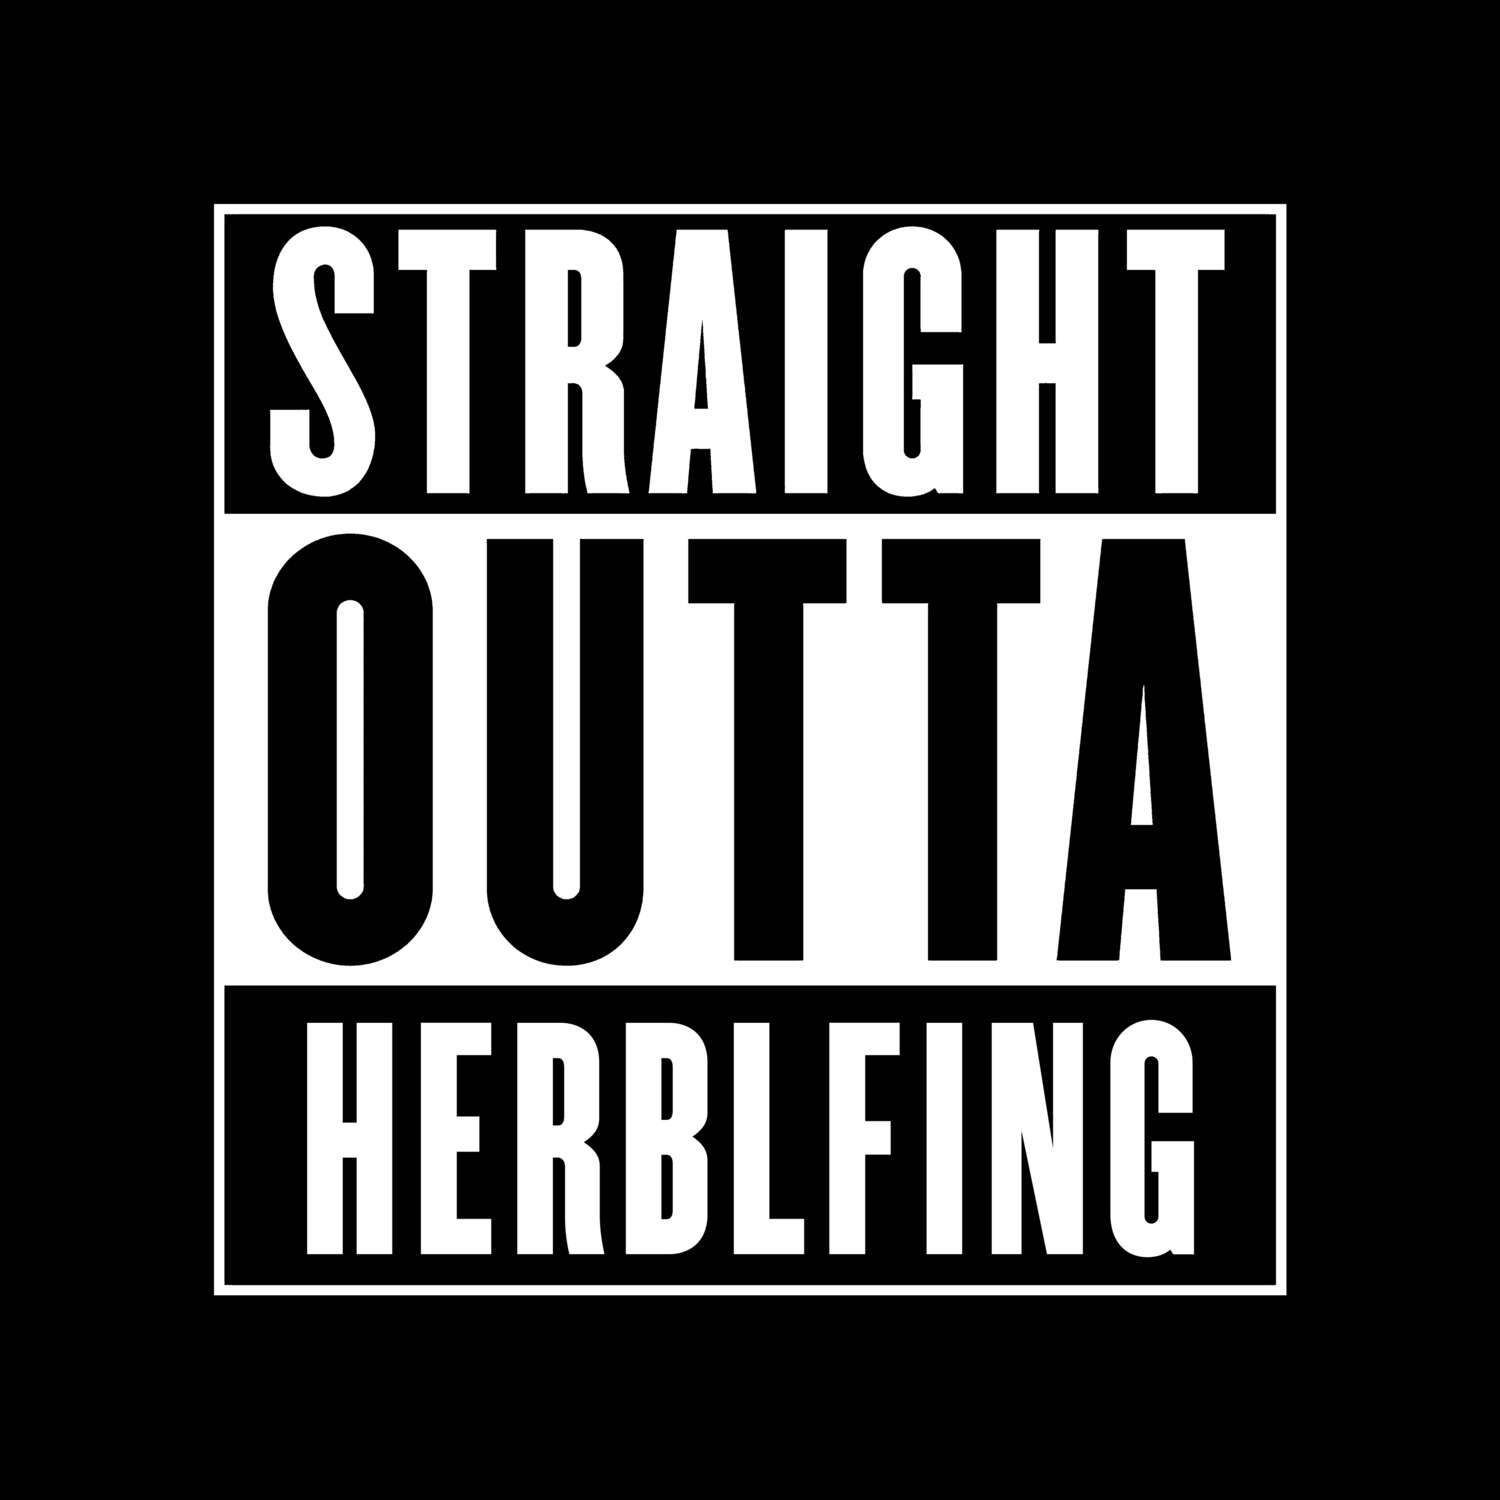 Herblfing T-Shirt »Straight Outta«